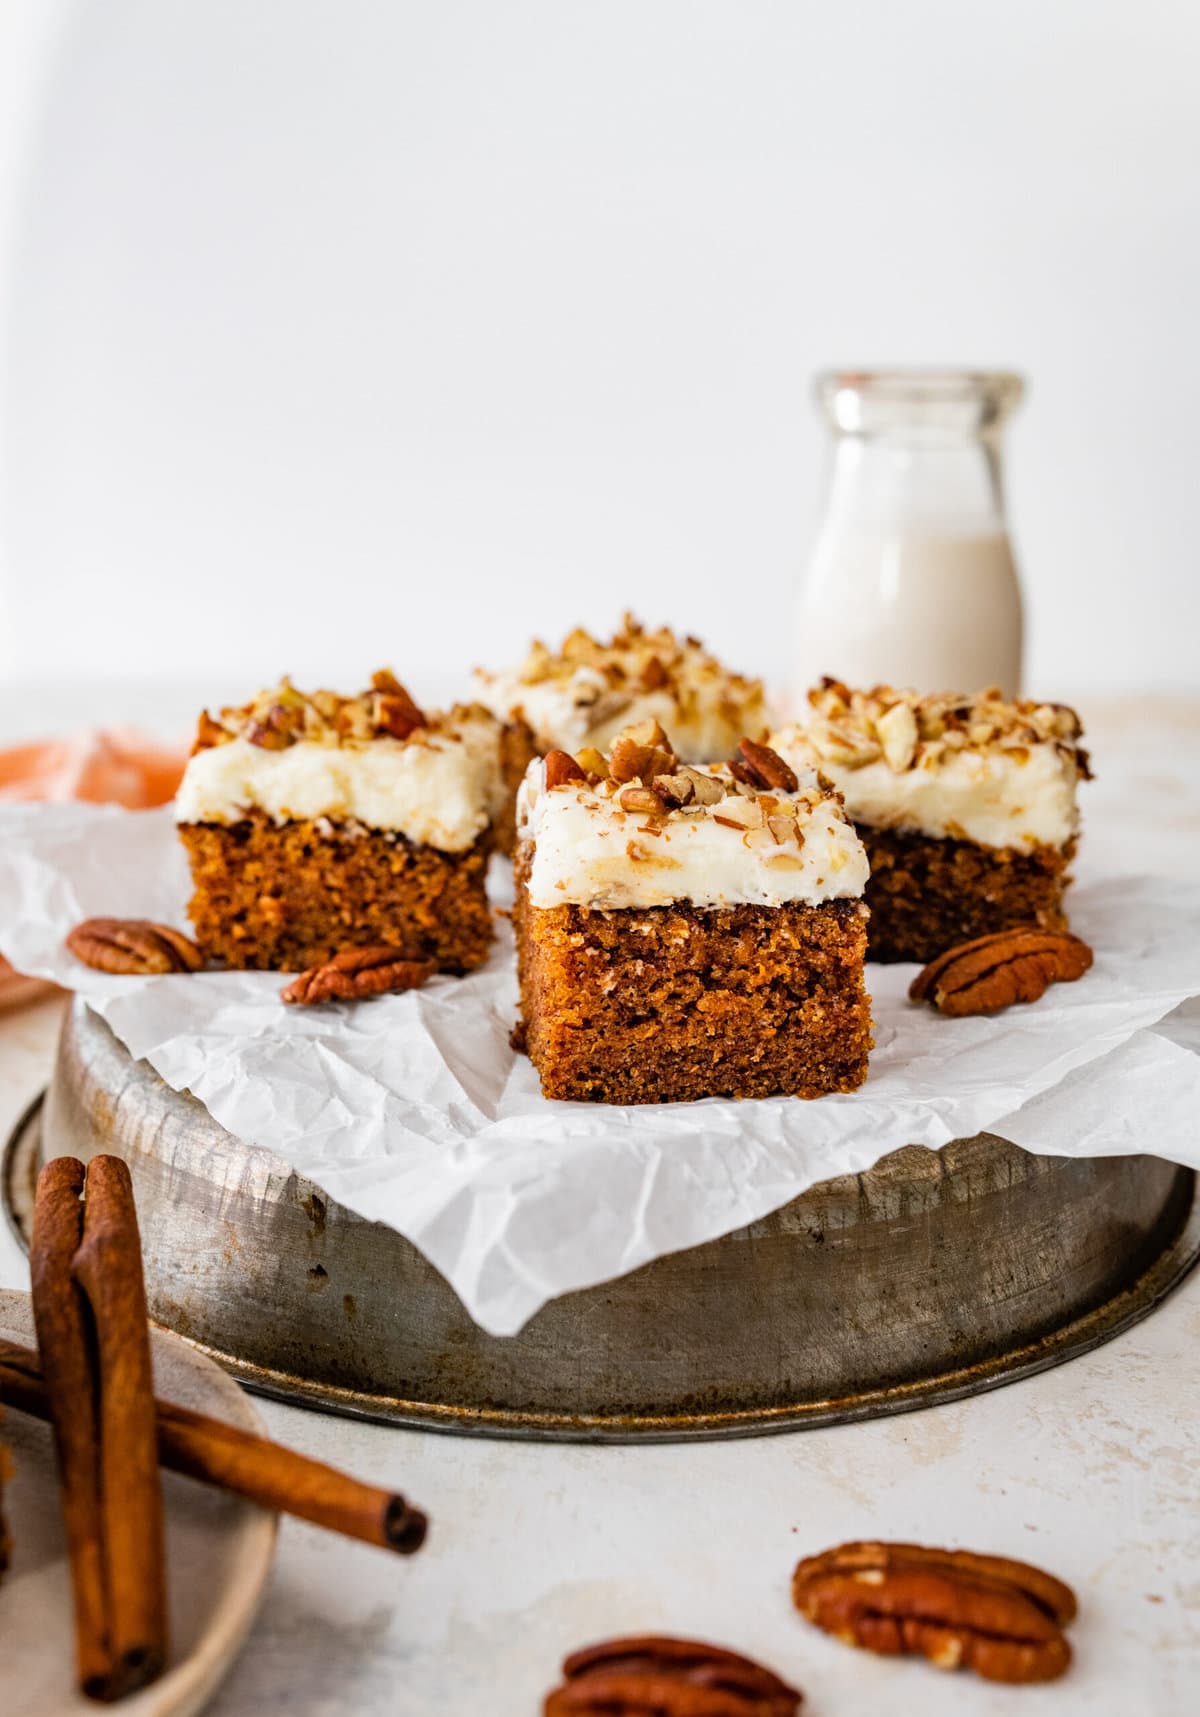 a tray of square slices of carrot cake with some pecans on the side.